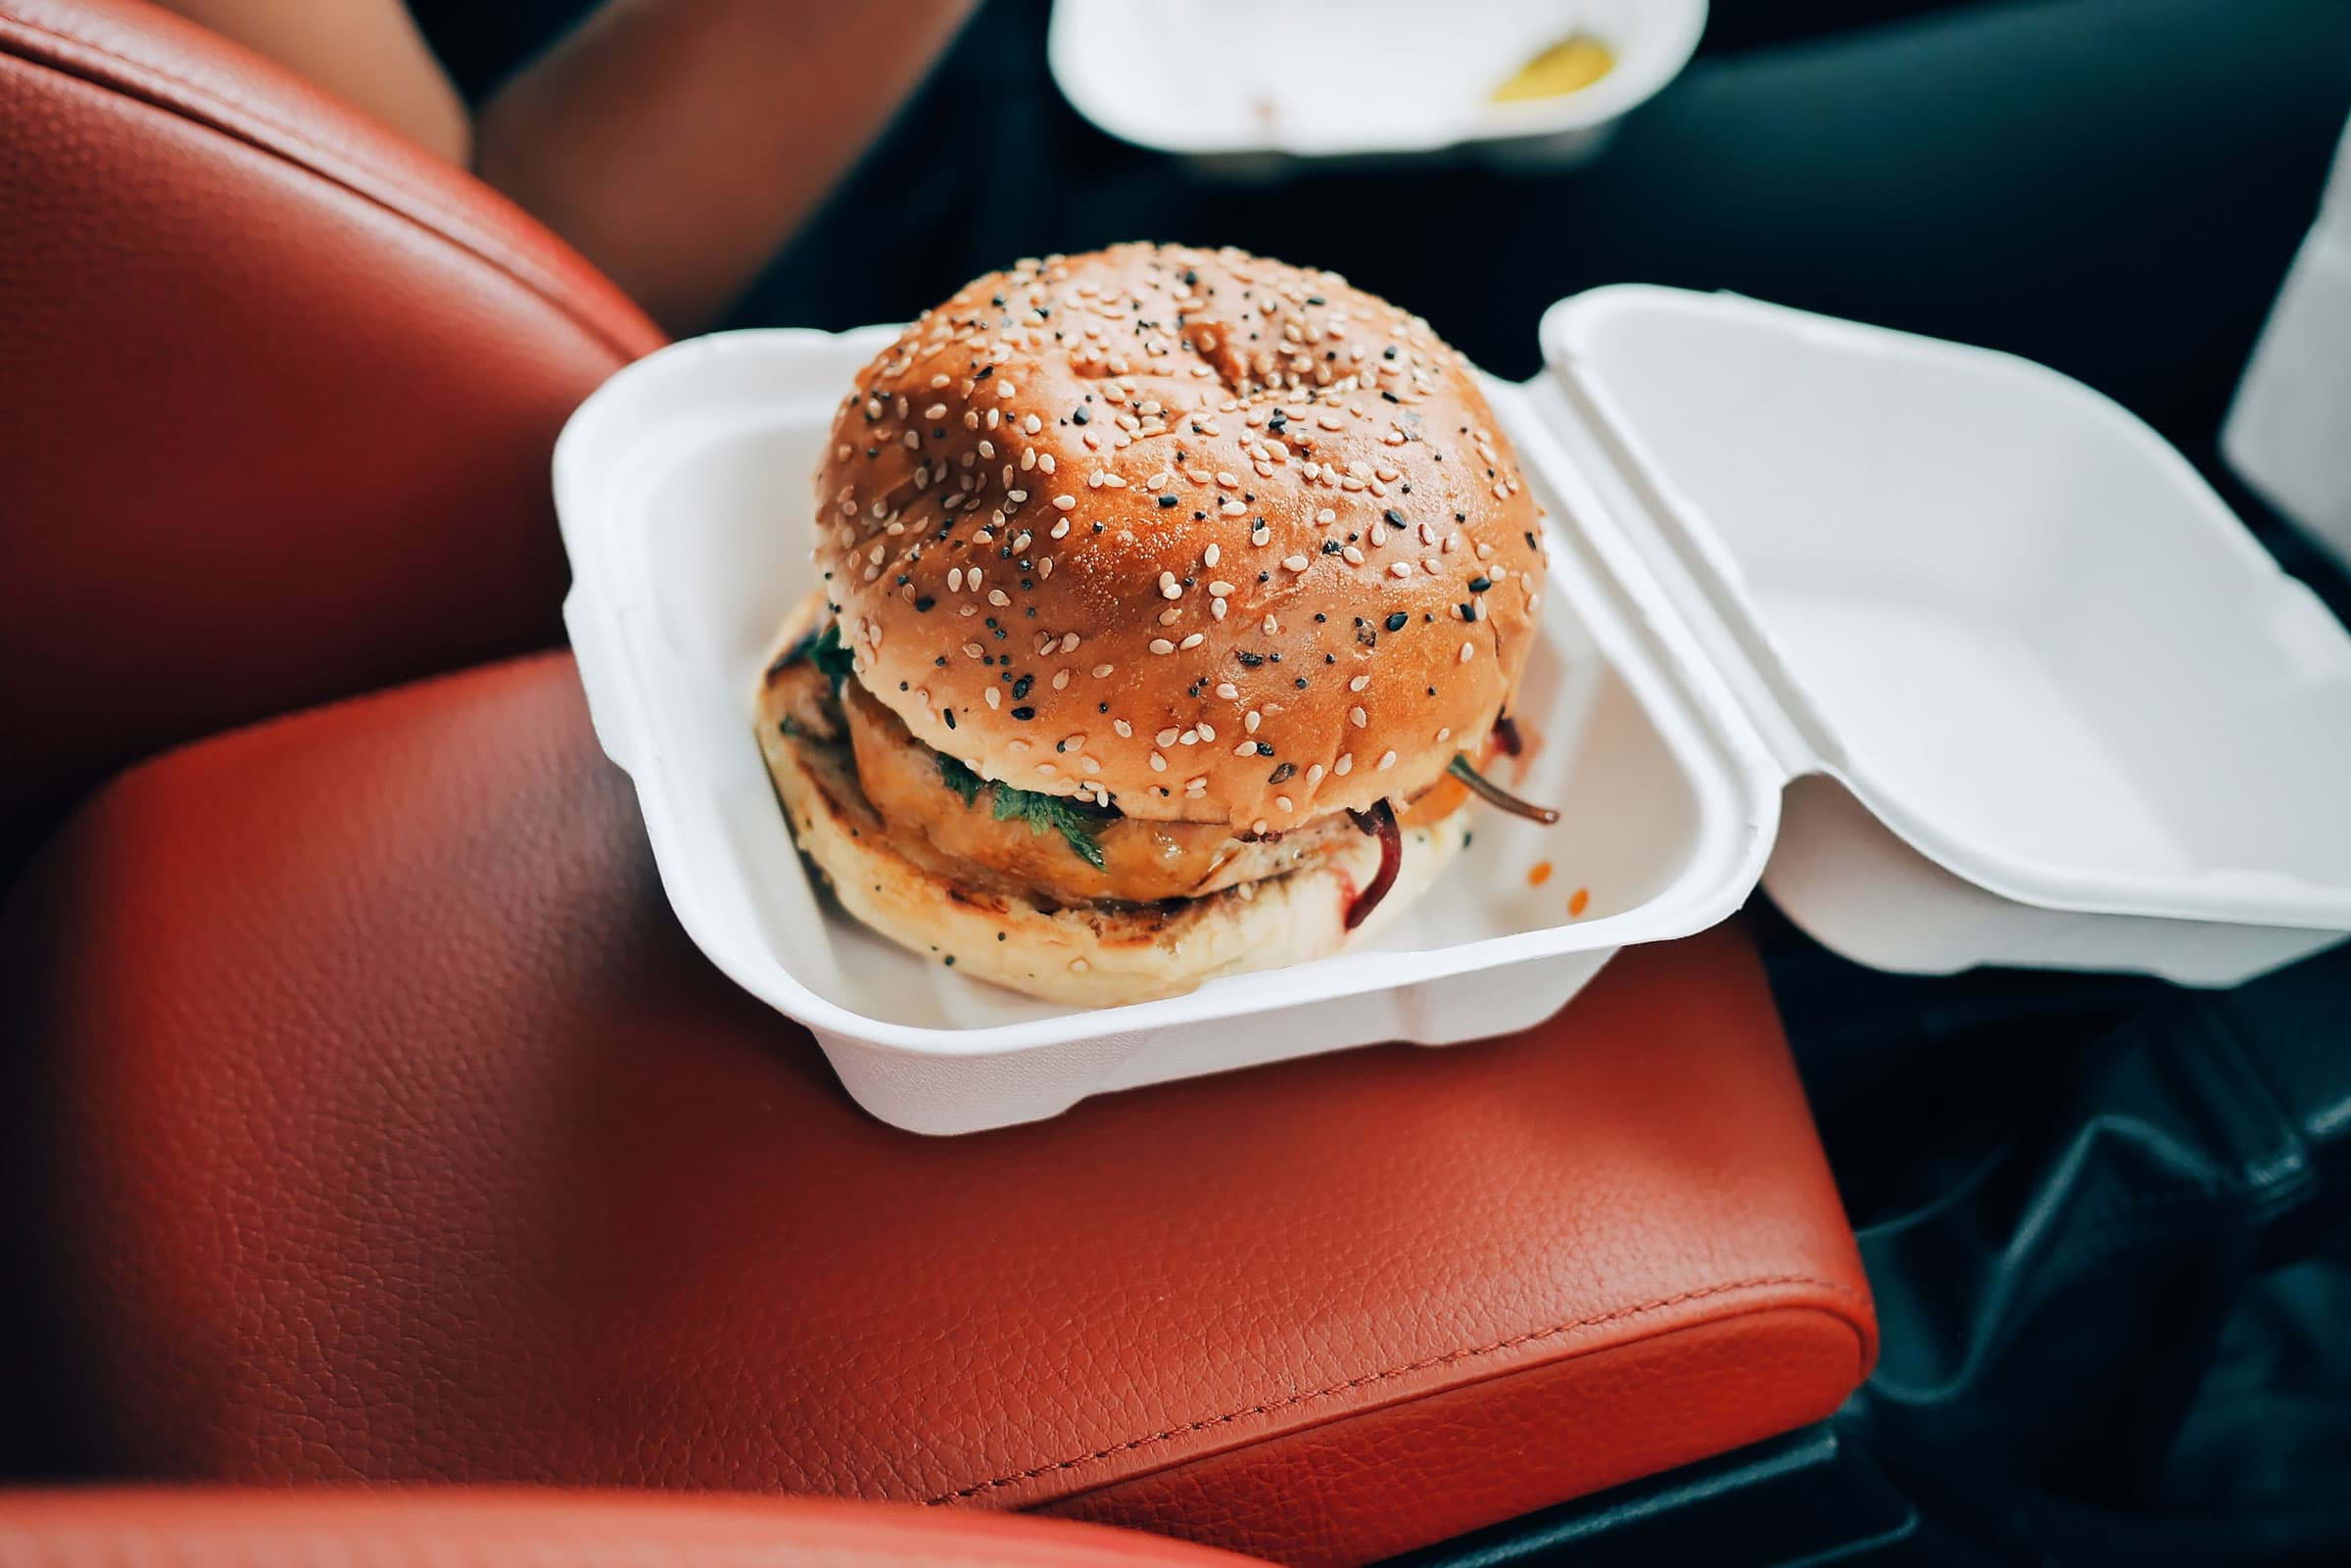 A burger in a takeaway container